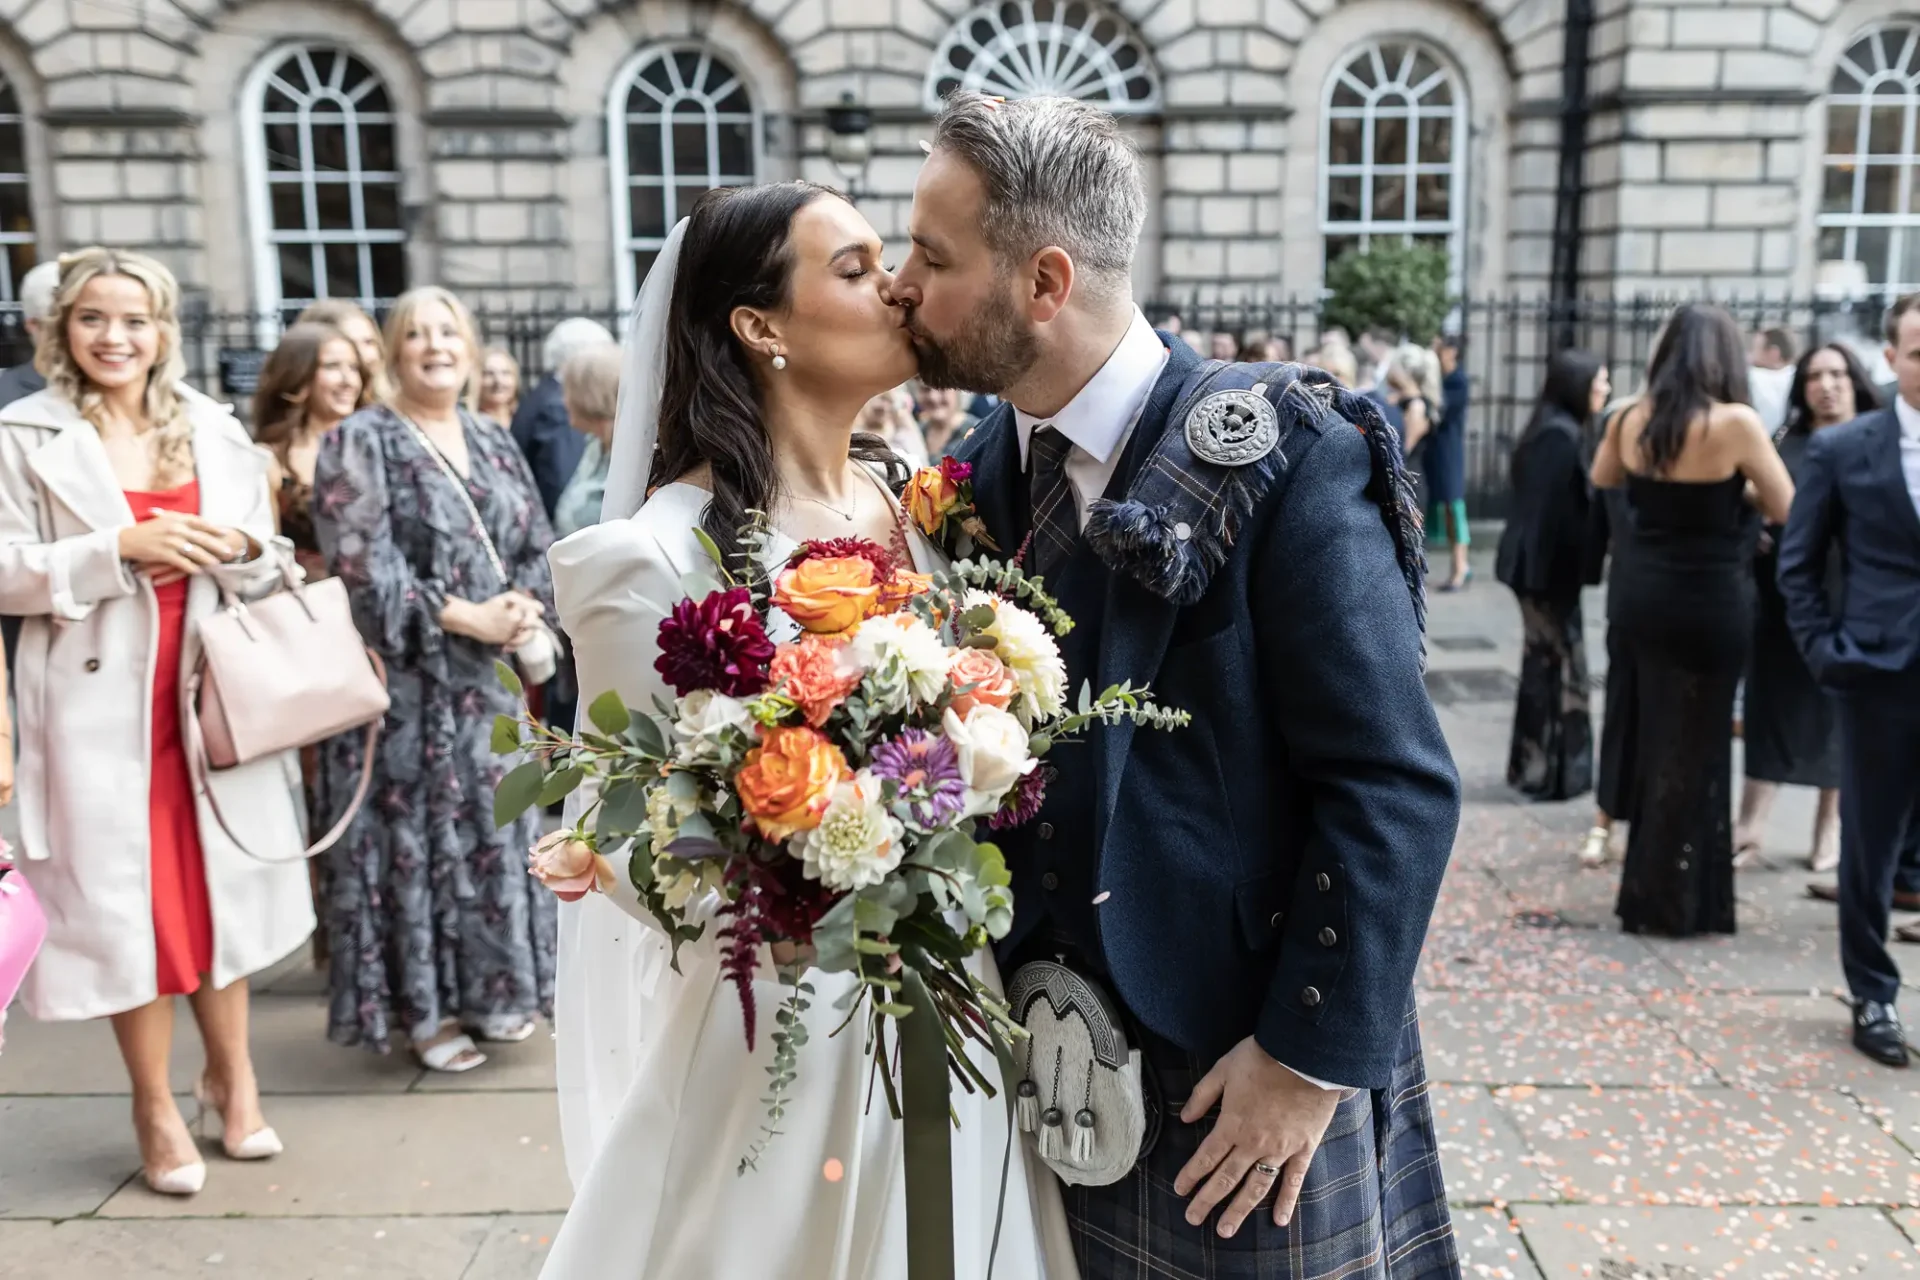 A newlywed couple kissing outside a building, surrounded by guests and confetti, with the groom wearing a kilt and the bride holding a bouquet.